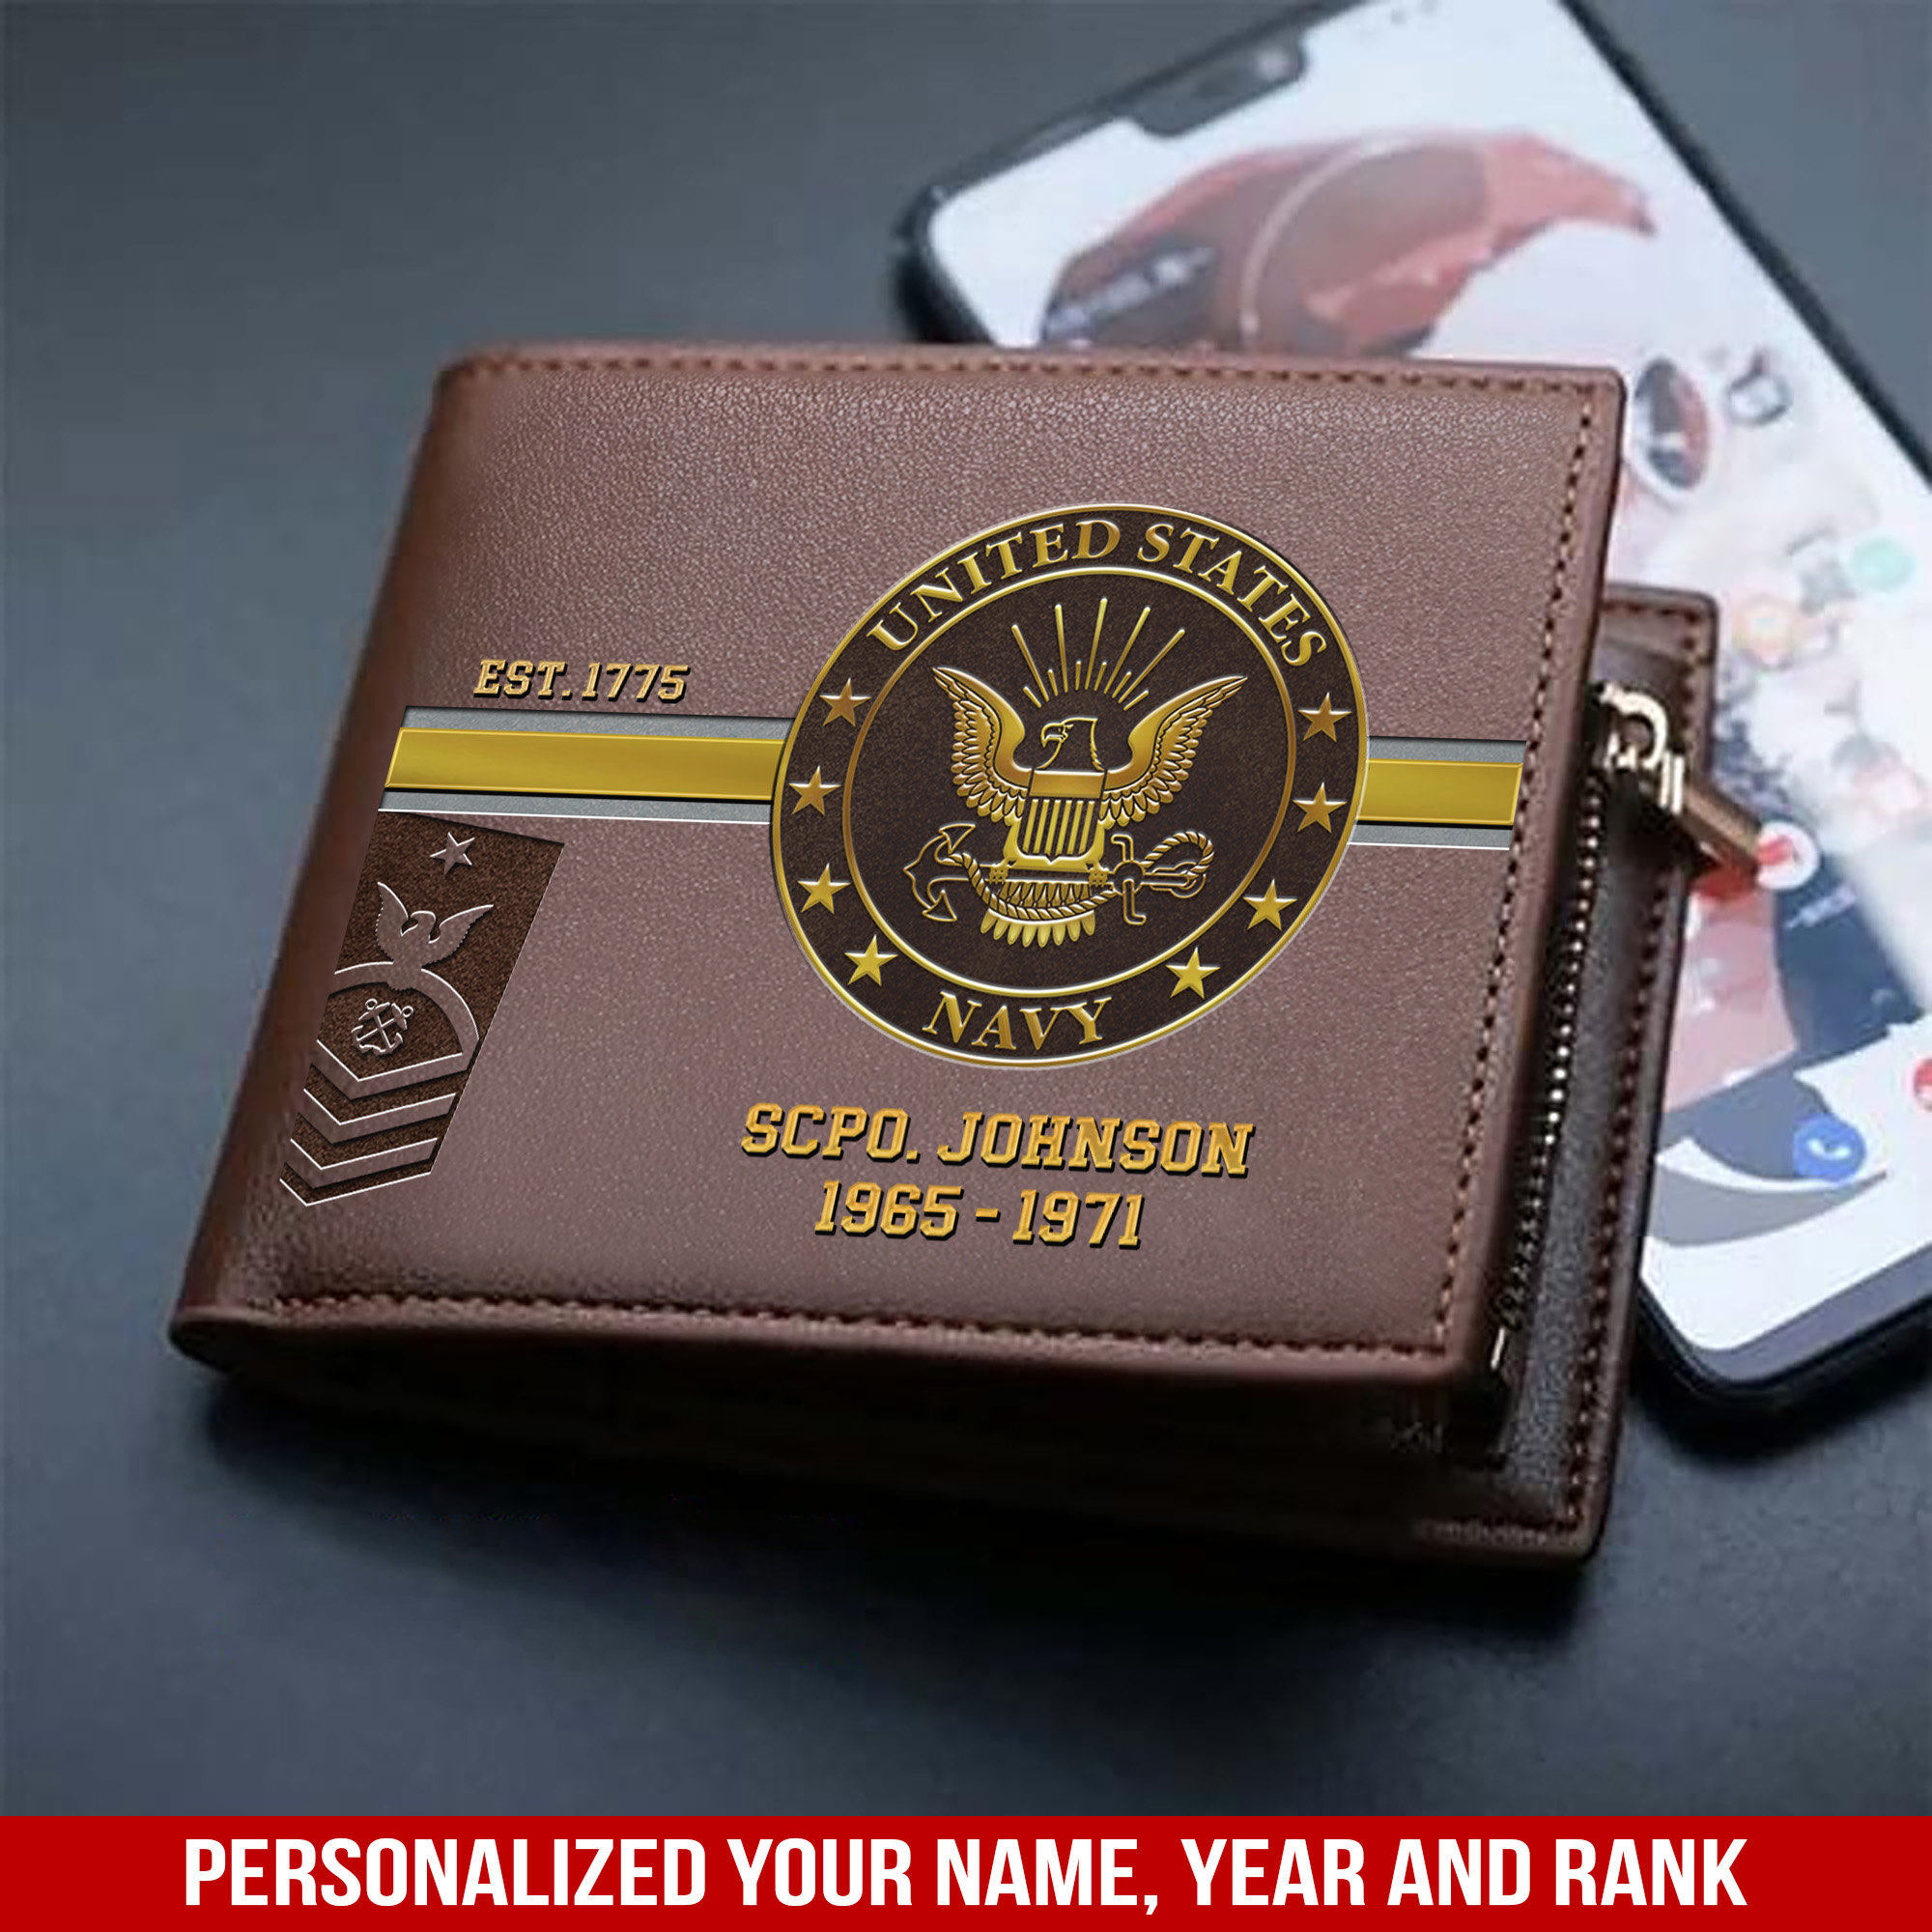 Personalized US Navy Military Men Wallet With Your Name, Year And Rank, Military Men Wallet For Soldiers, US Military Gifts ETHY-57437